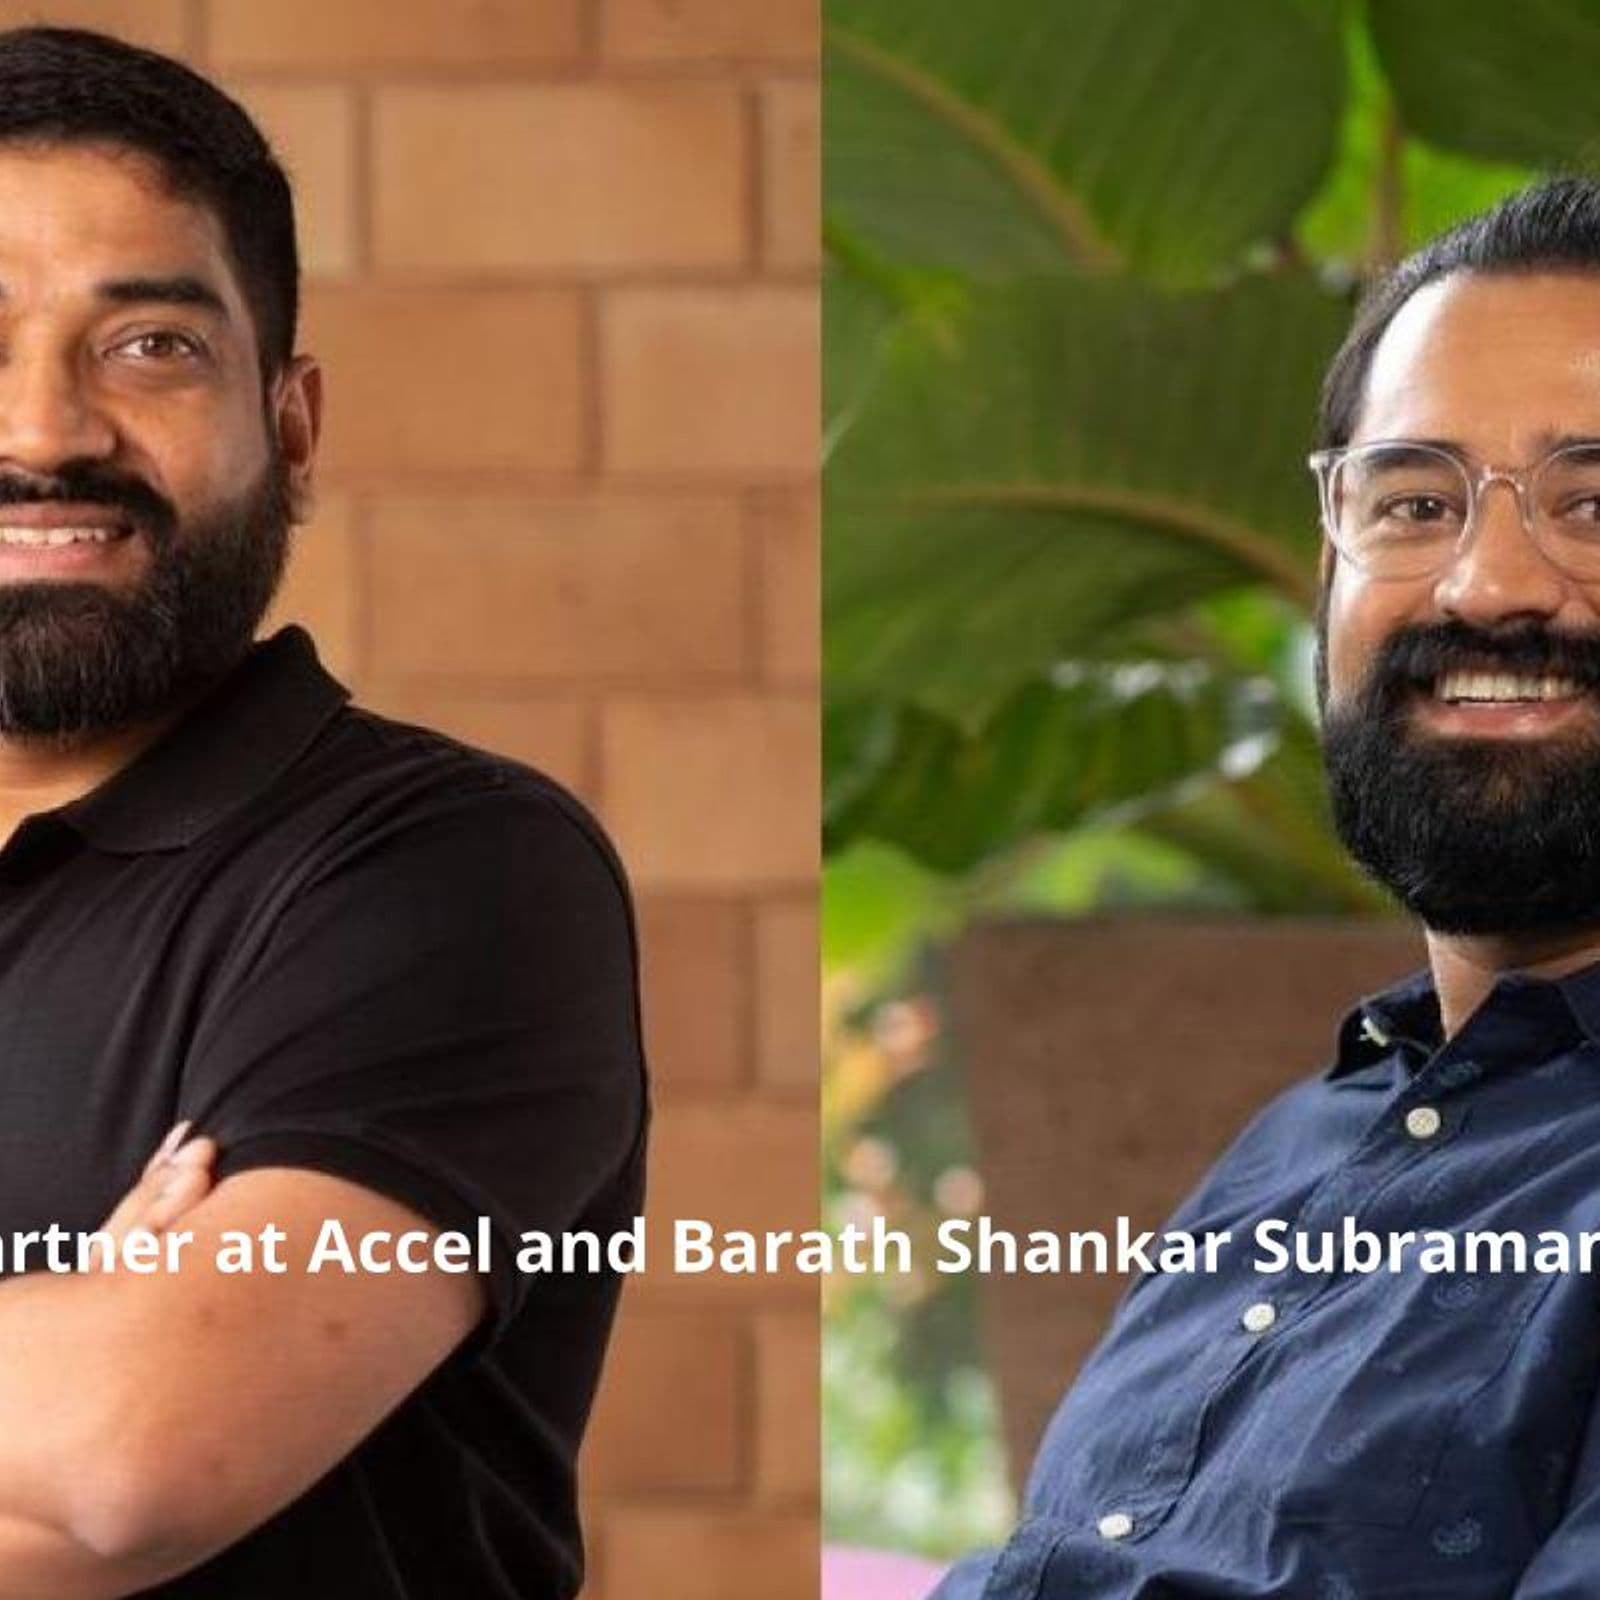 Accel selects 8 startups for third cohort of accelerator programme Atoms